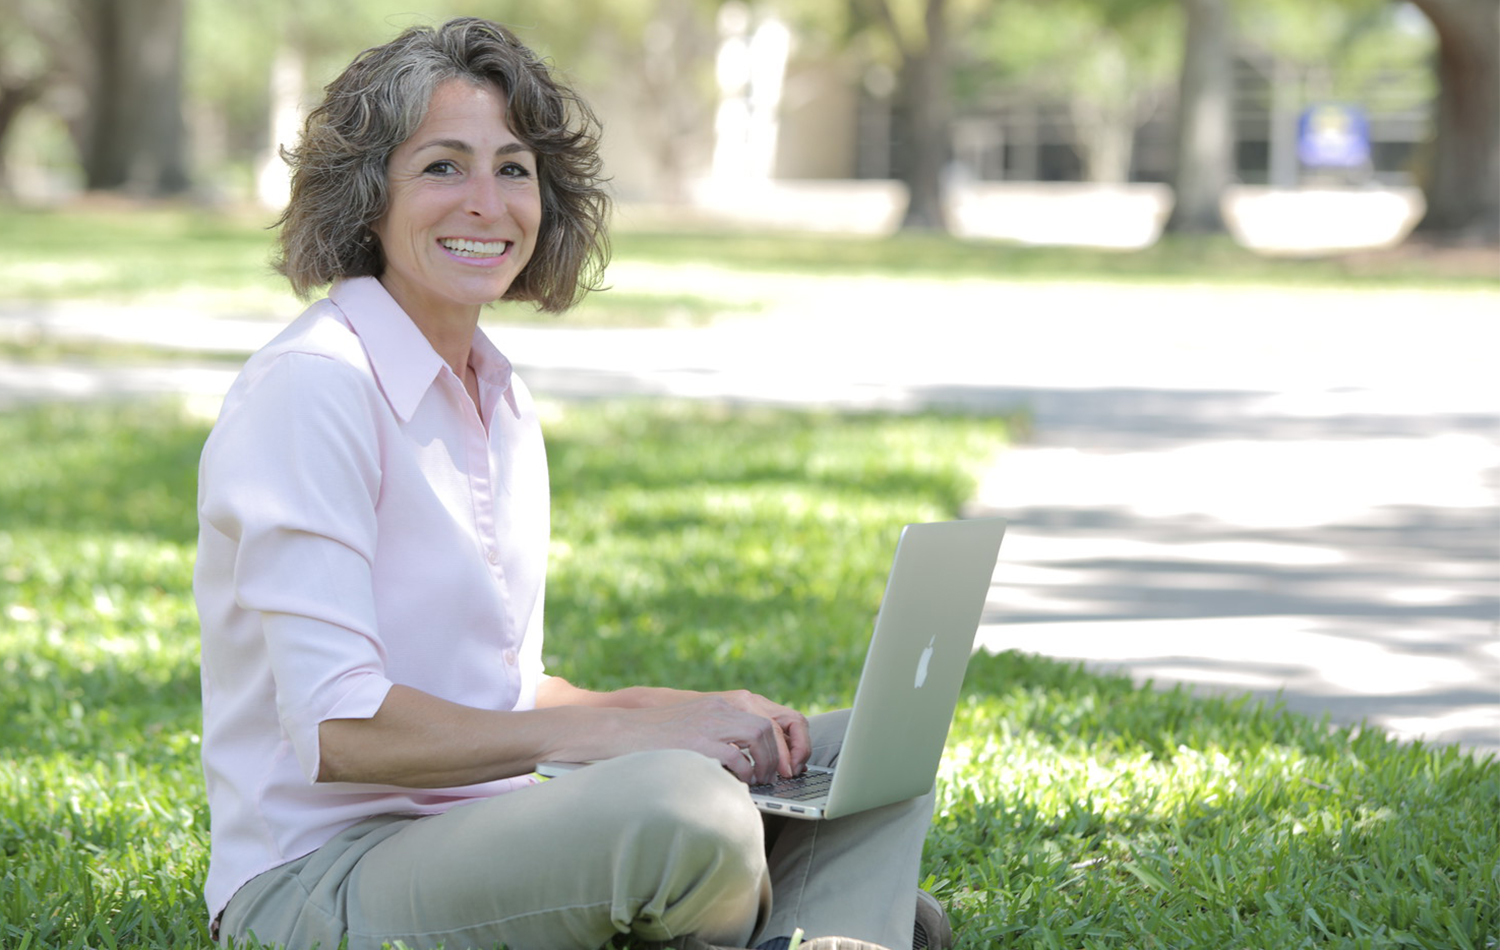 a woman on campus, sitting in the grass, using a laptop